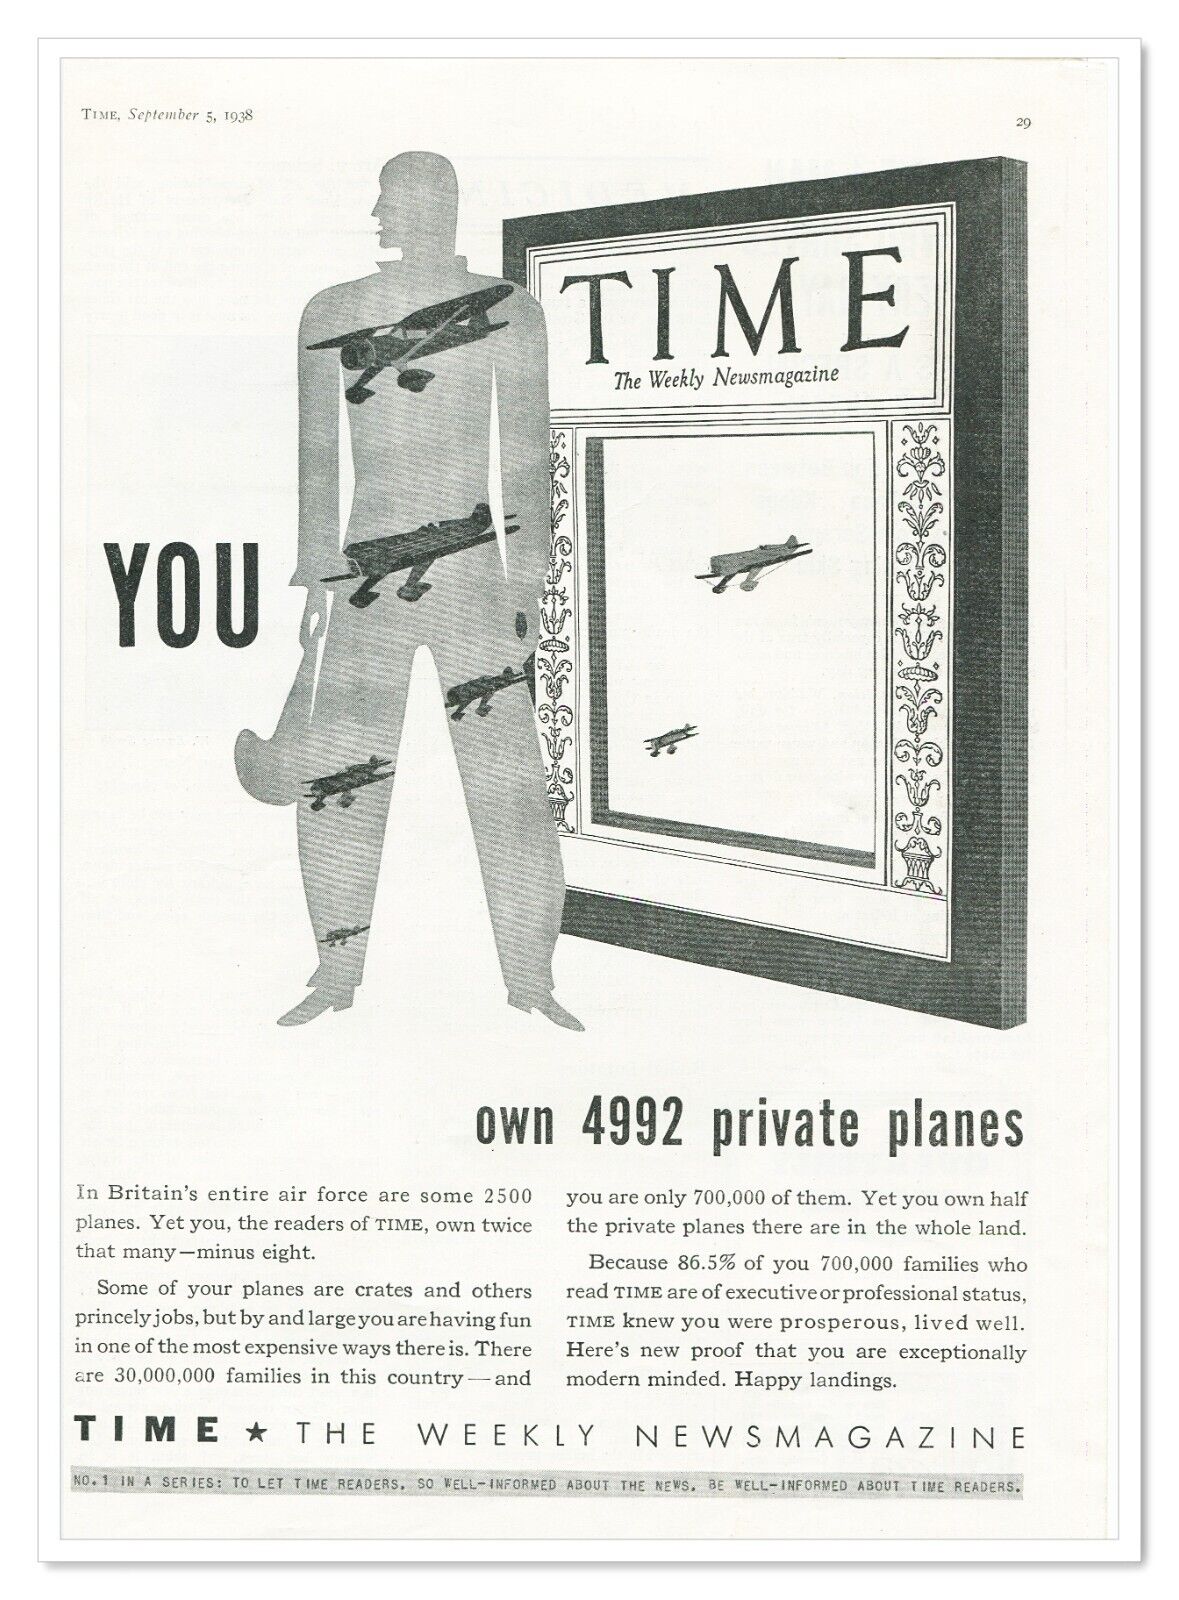 Print Ad Time Magazine You Own 4992 Private Planes Vintage 1938 Advertisement